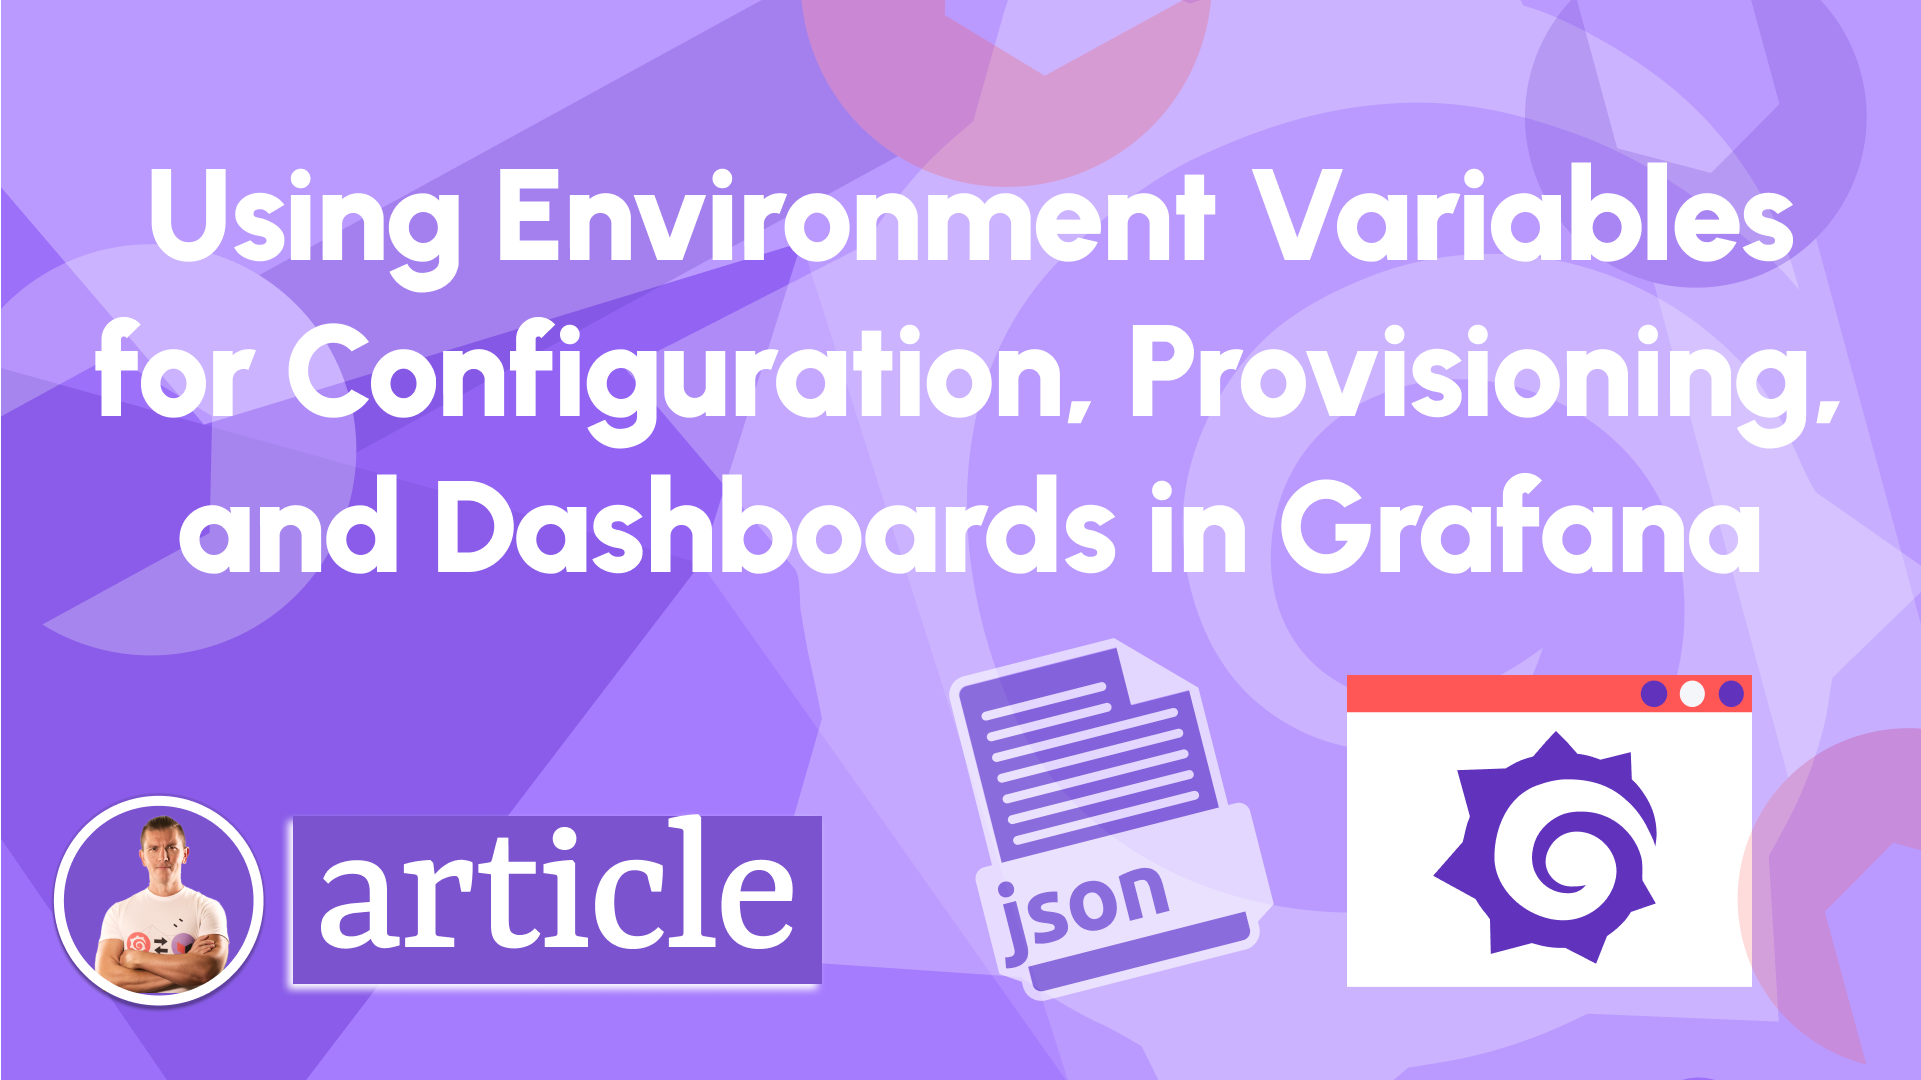 Environment Variables for Configuration, Provisioning, and Dashboards in Grafana.